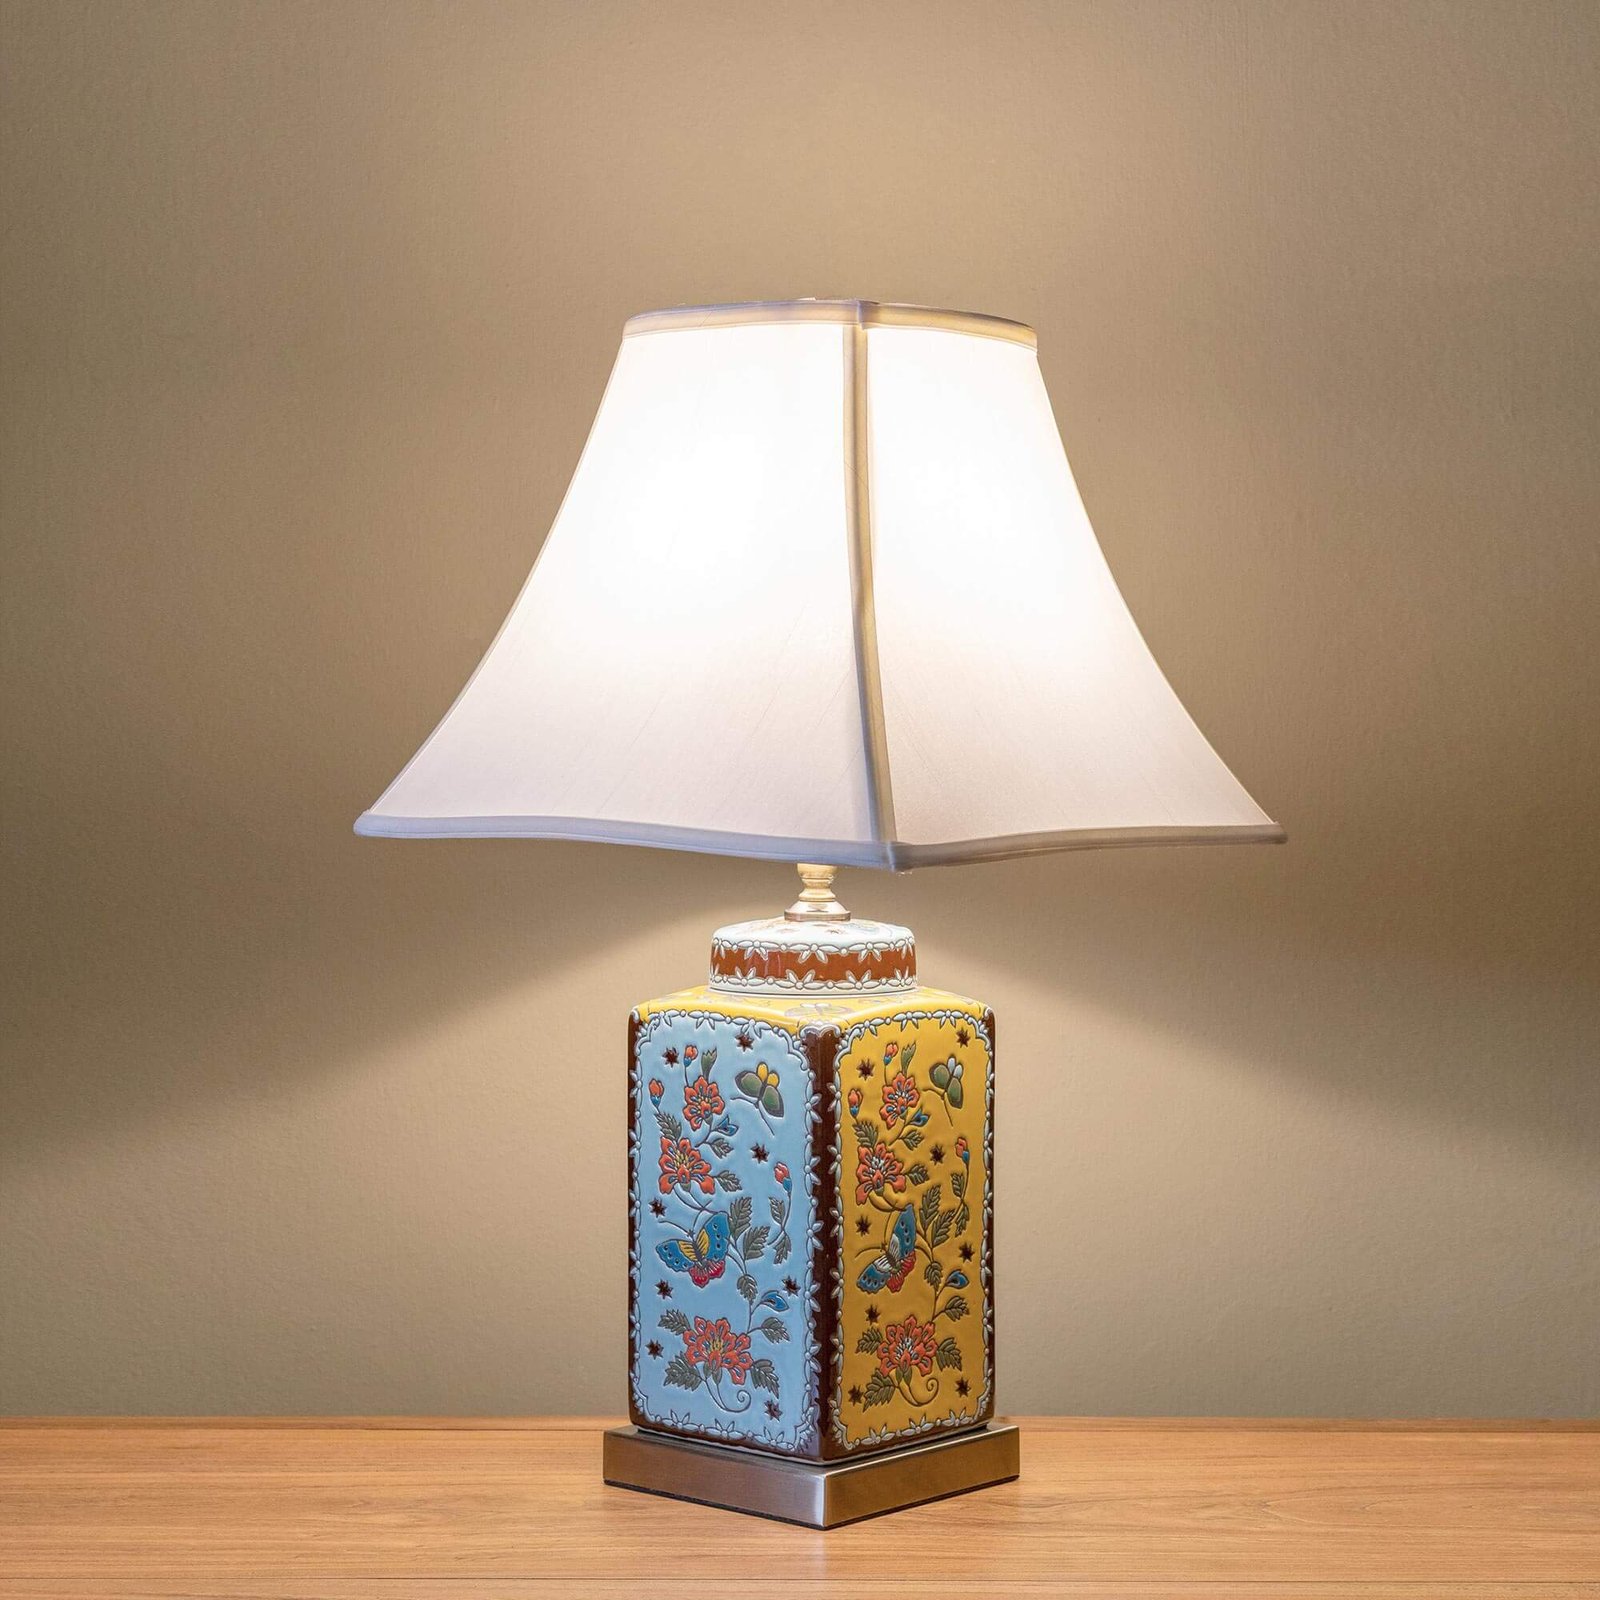 Xh 366 Yellow Blue Square Ceramic Table Lamp Just Anthony